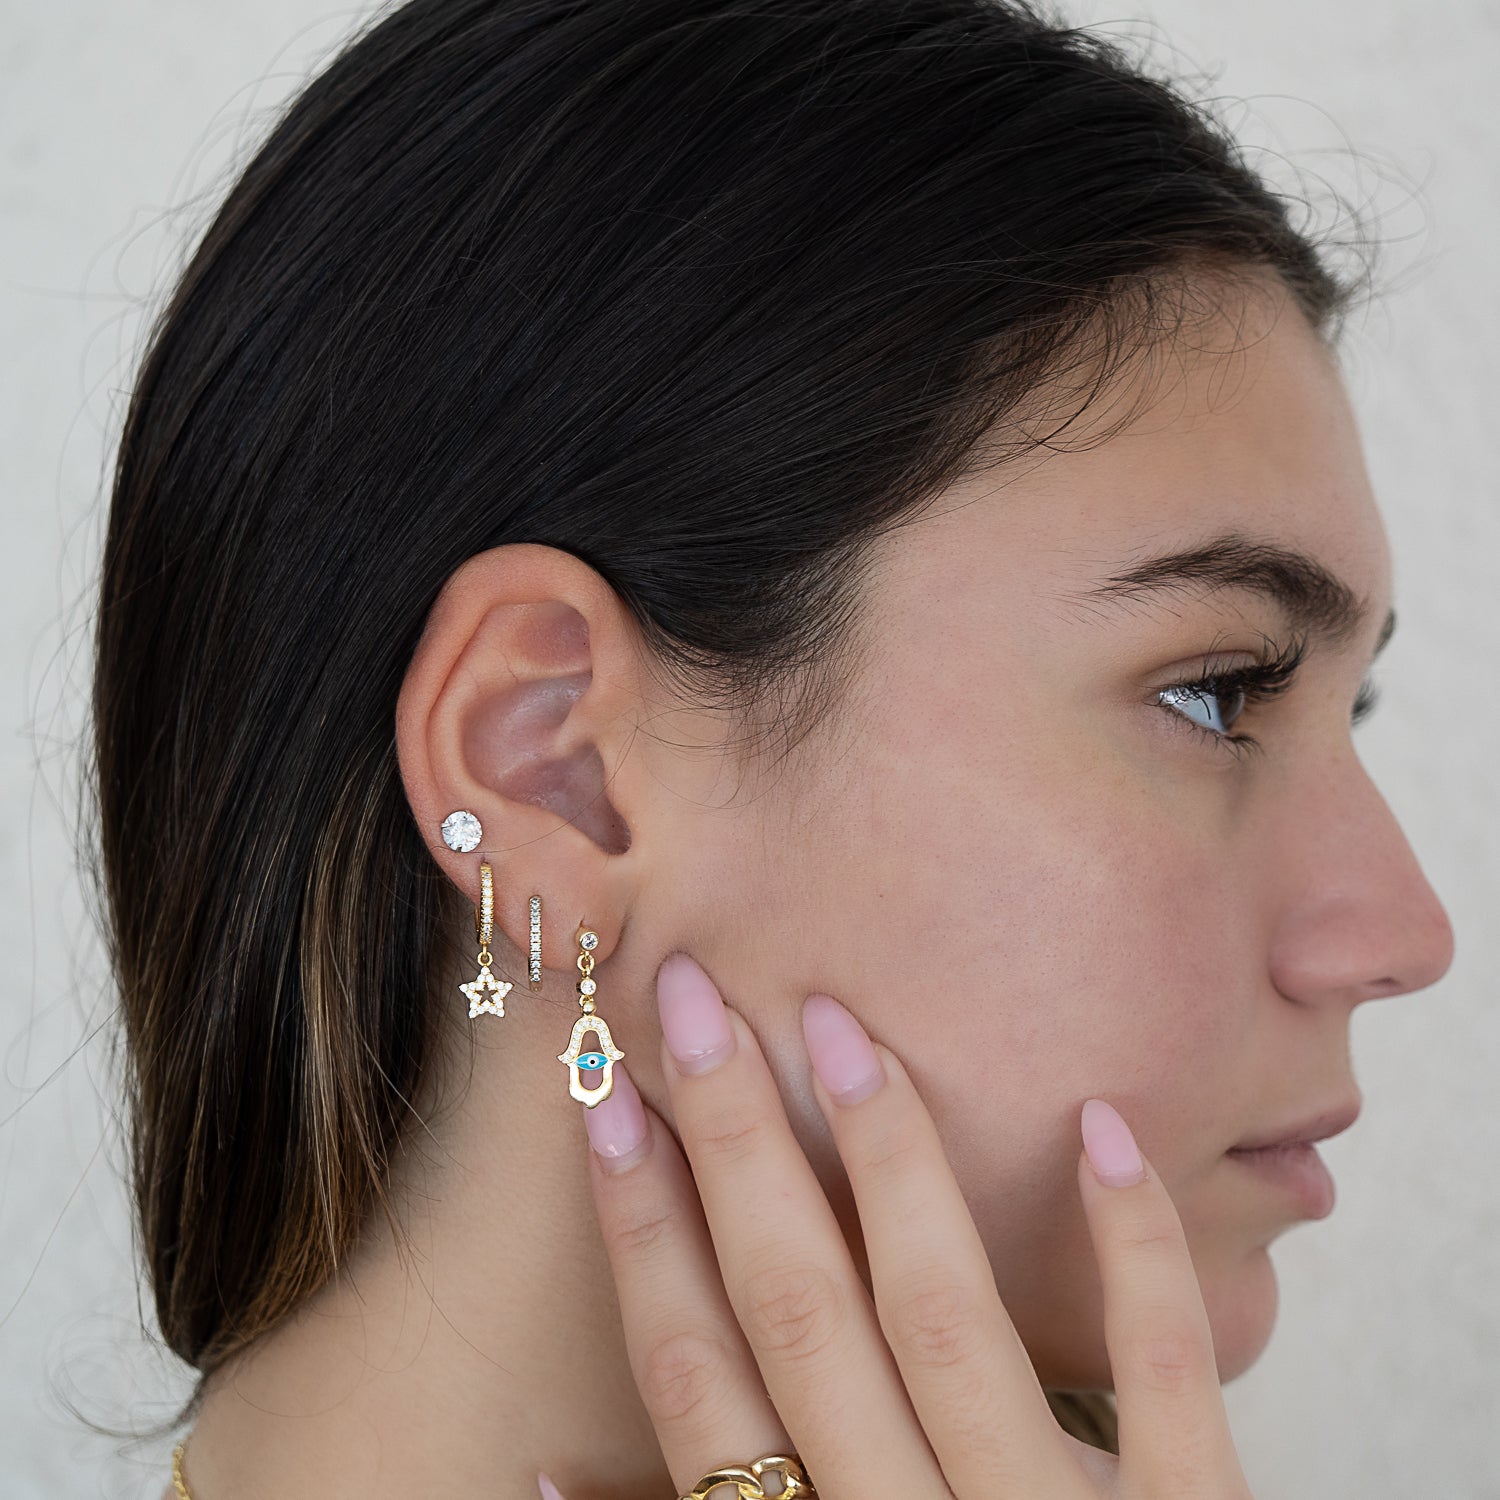 The earrings adding a touch of beauty and spirituality to the model's look